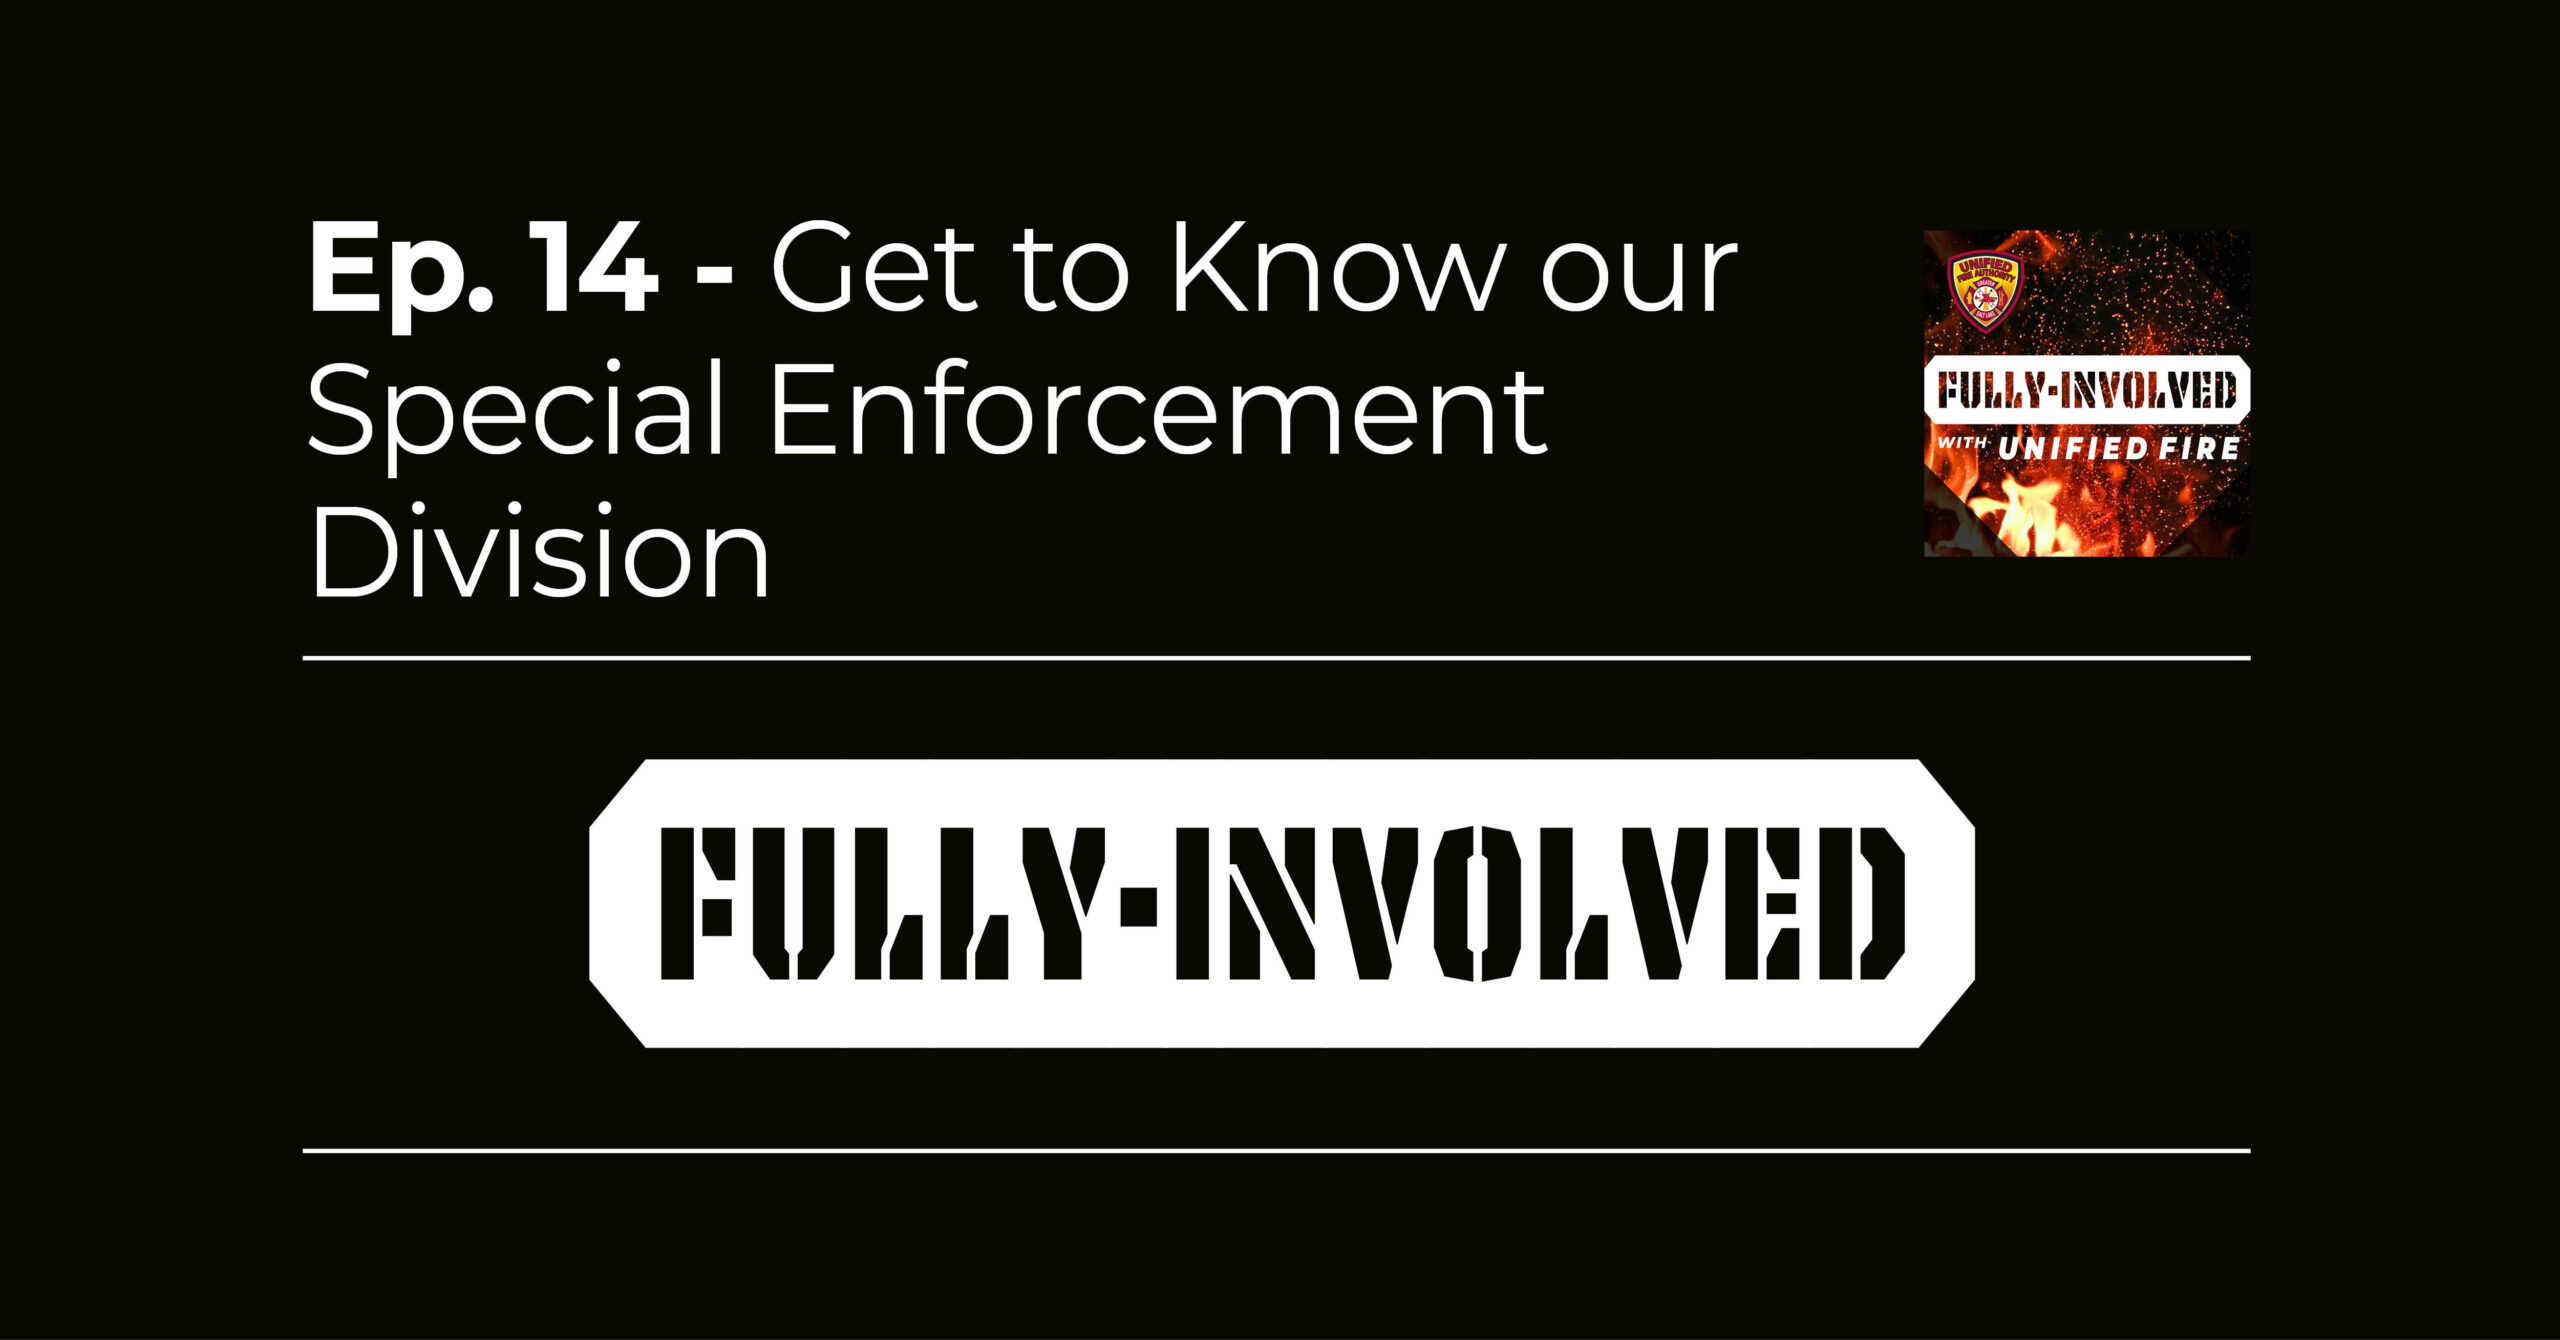 Ep. 14 - Get to Know our Special Enforcement Division